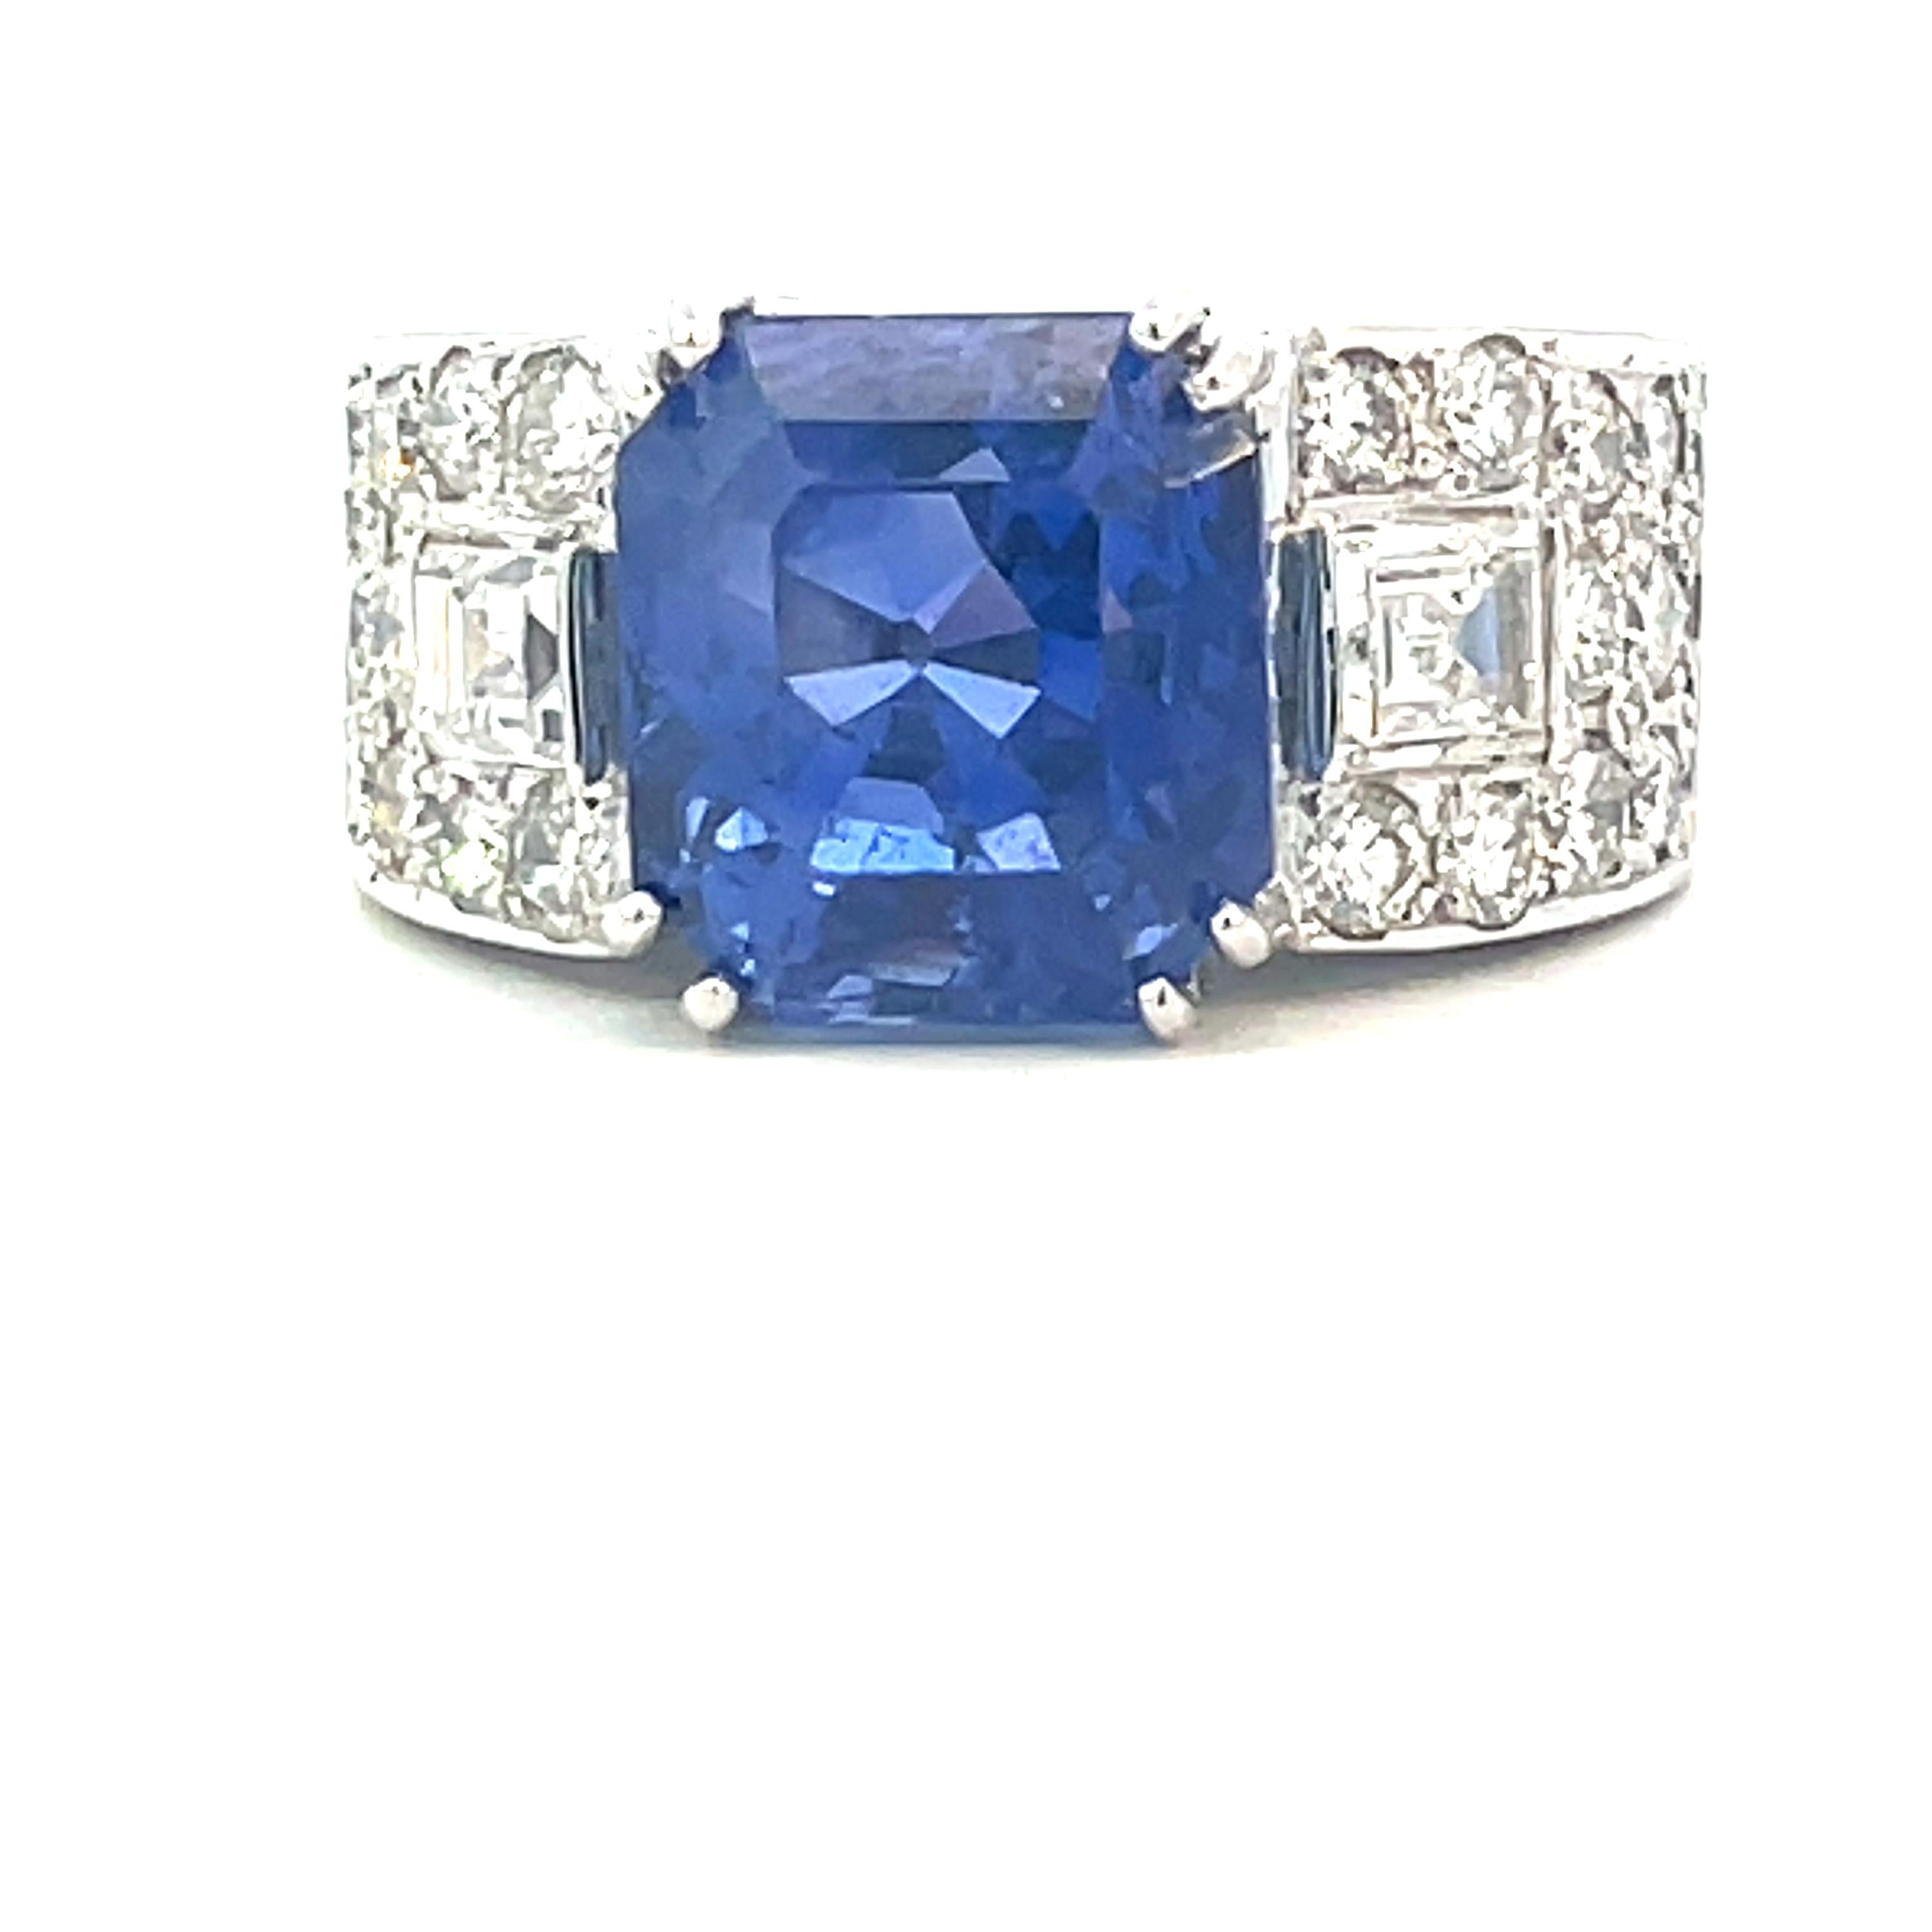 Exquisite Sapphire and Diamond Platinum Ring

Introducing a breathtaking masterpiece featuring a stunning 7.36-carat central blue sapphire of remarkable vivid blue tone. This captivating gem, originating from Ceylon, boasts a rare quality,